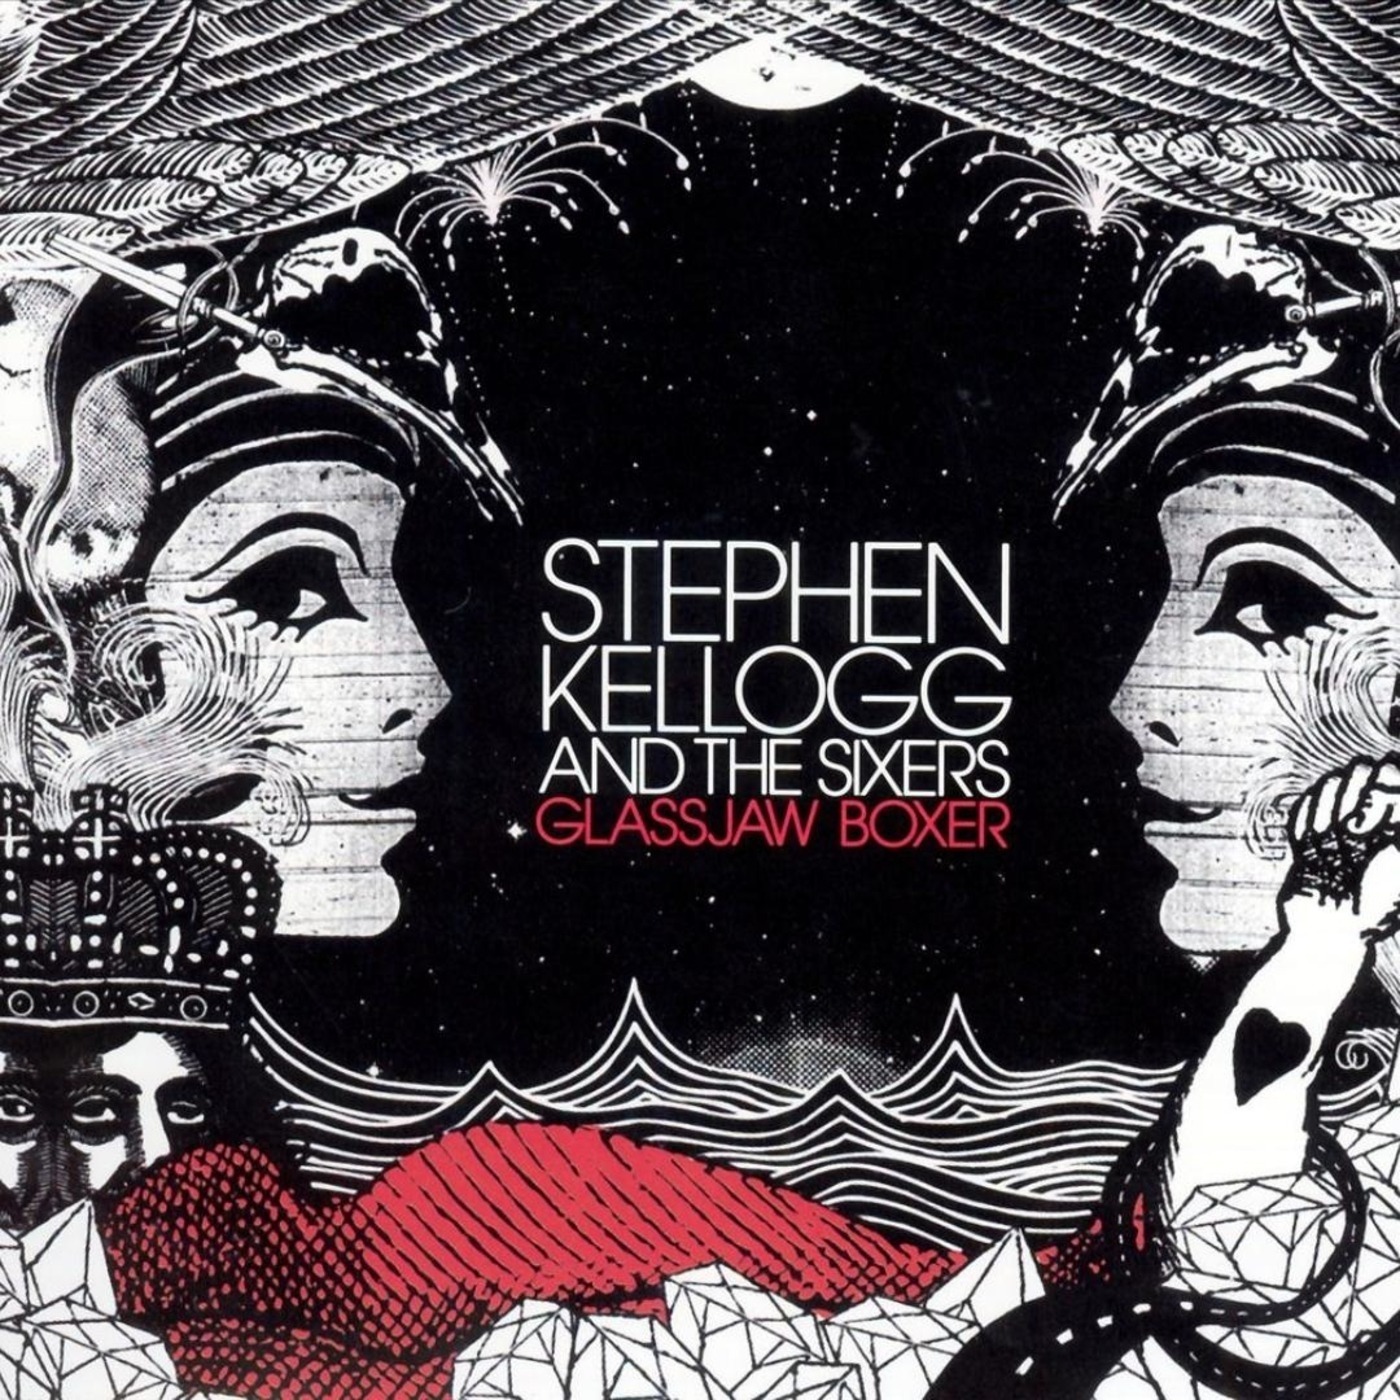 Fourth of July by Stephen Kellogg and The Sixers